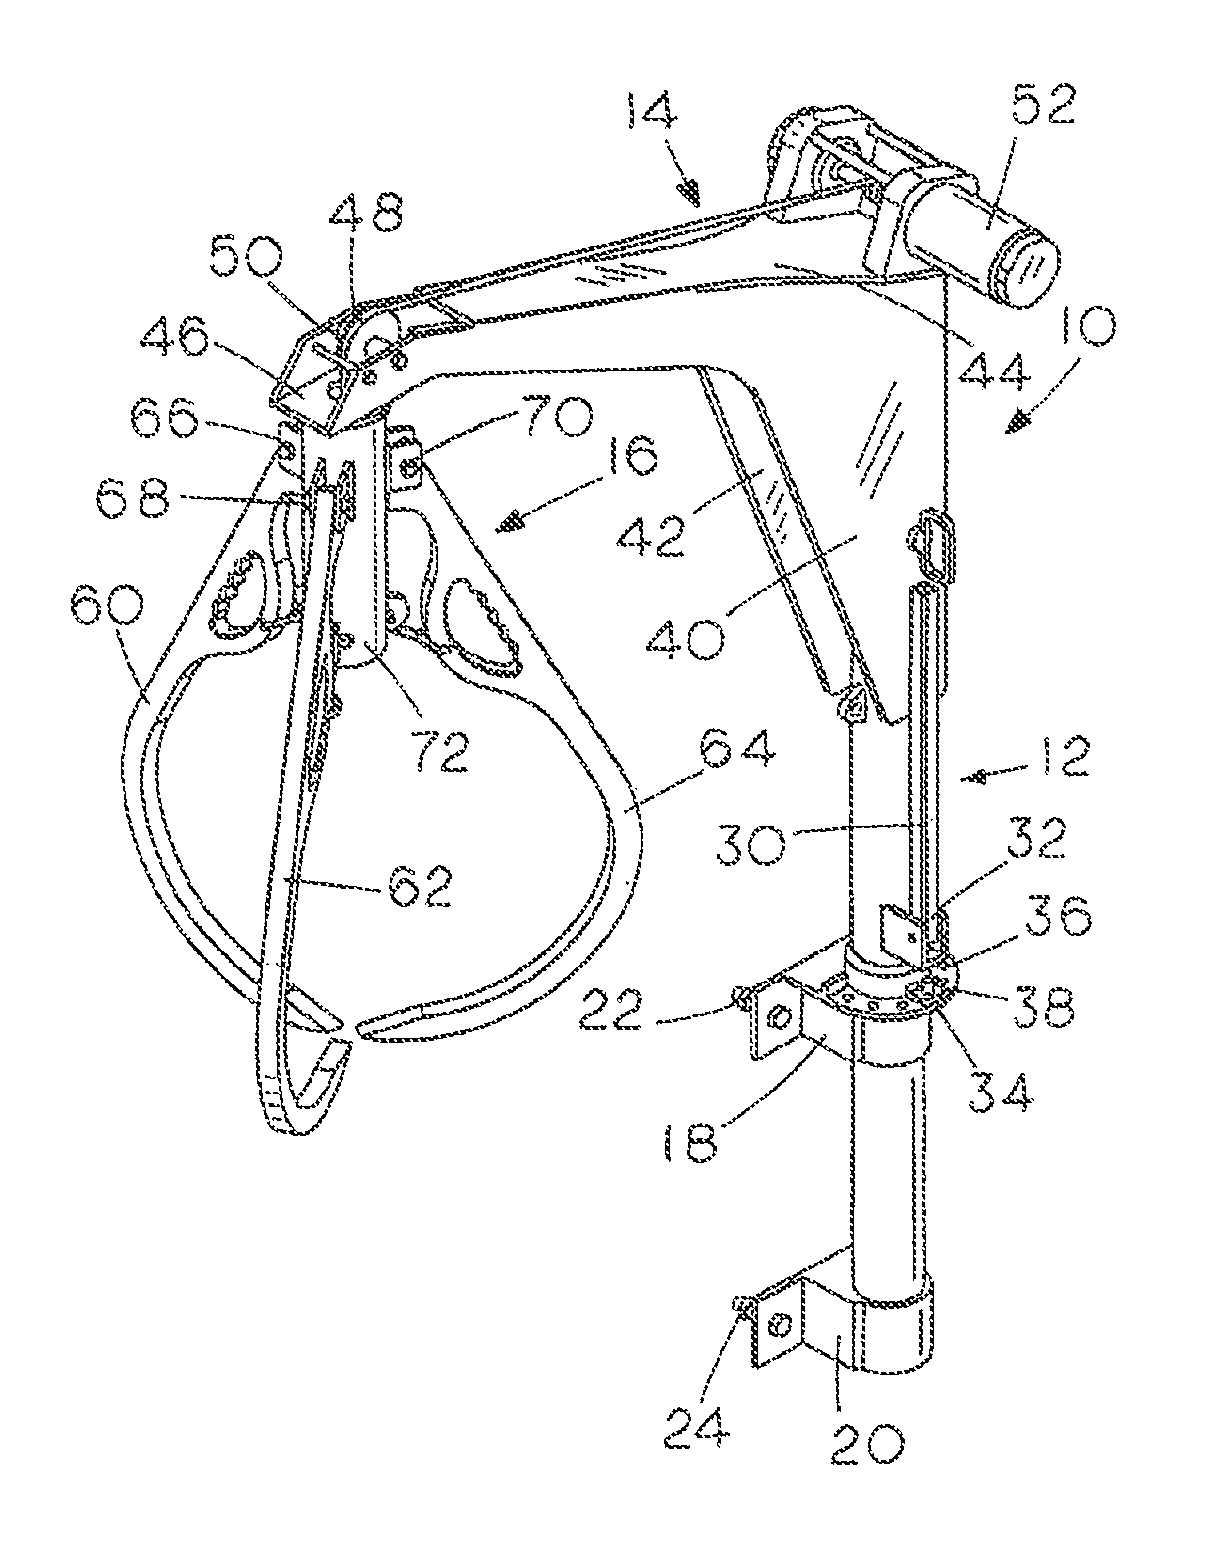 On-board grapple hoist for agriculture vehicle